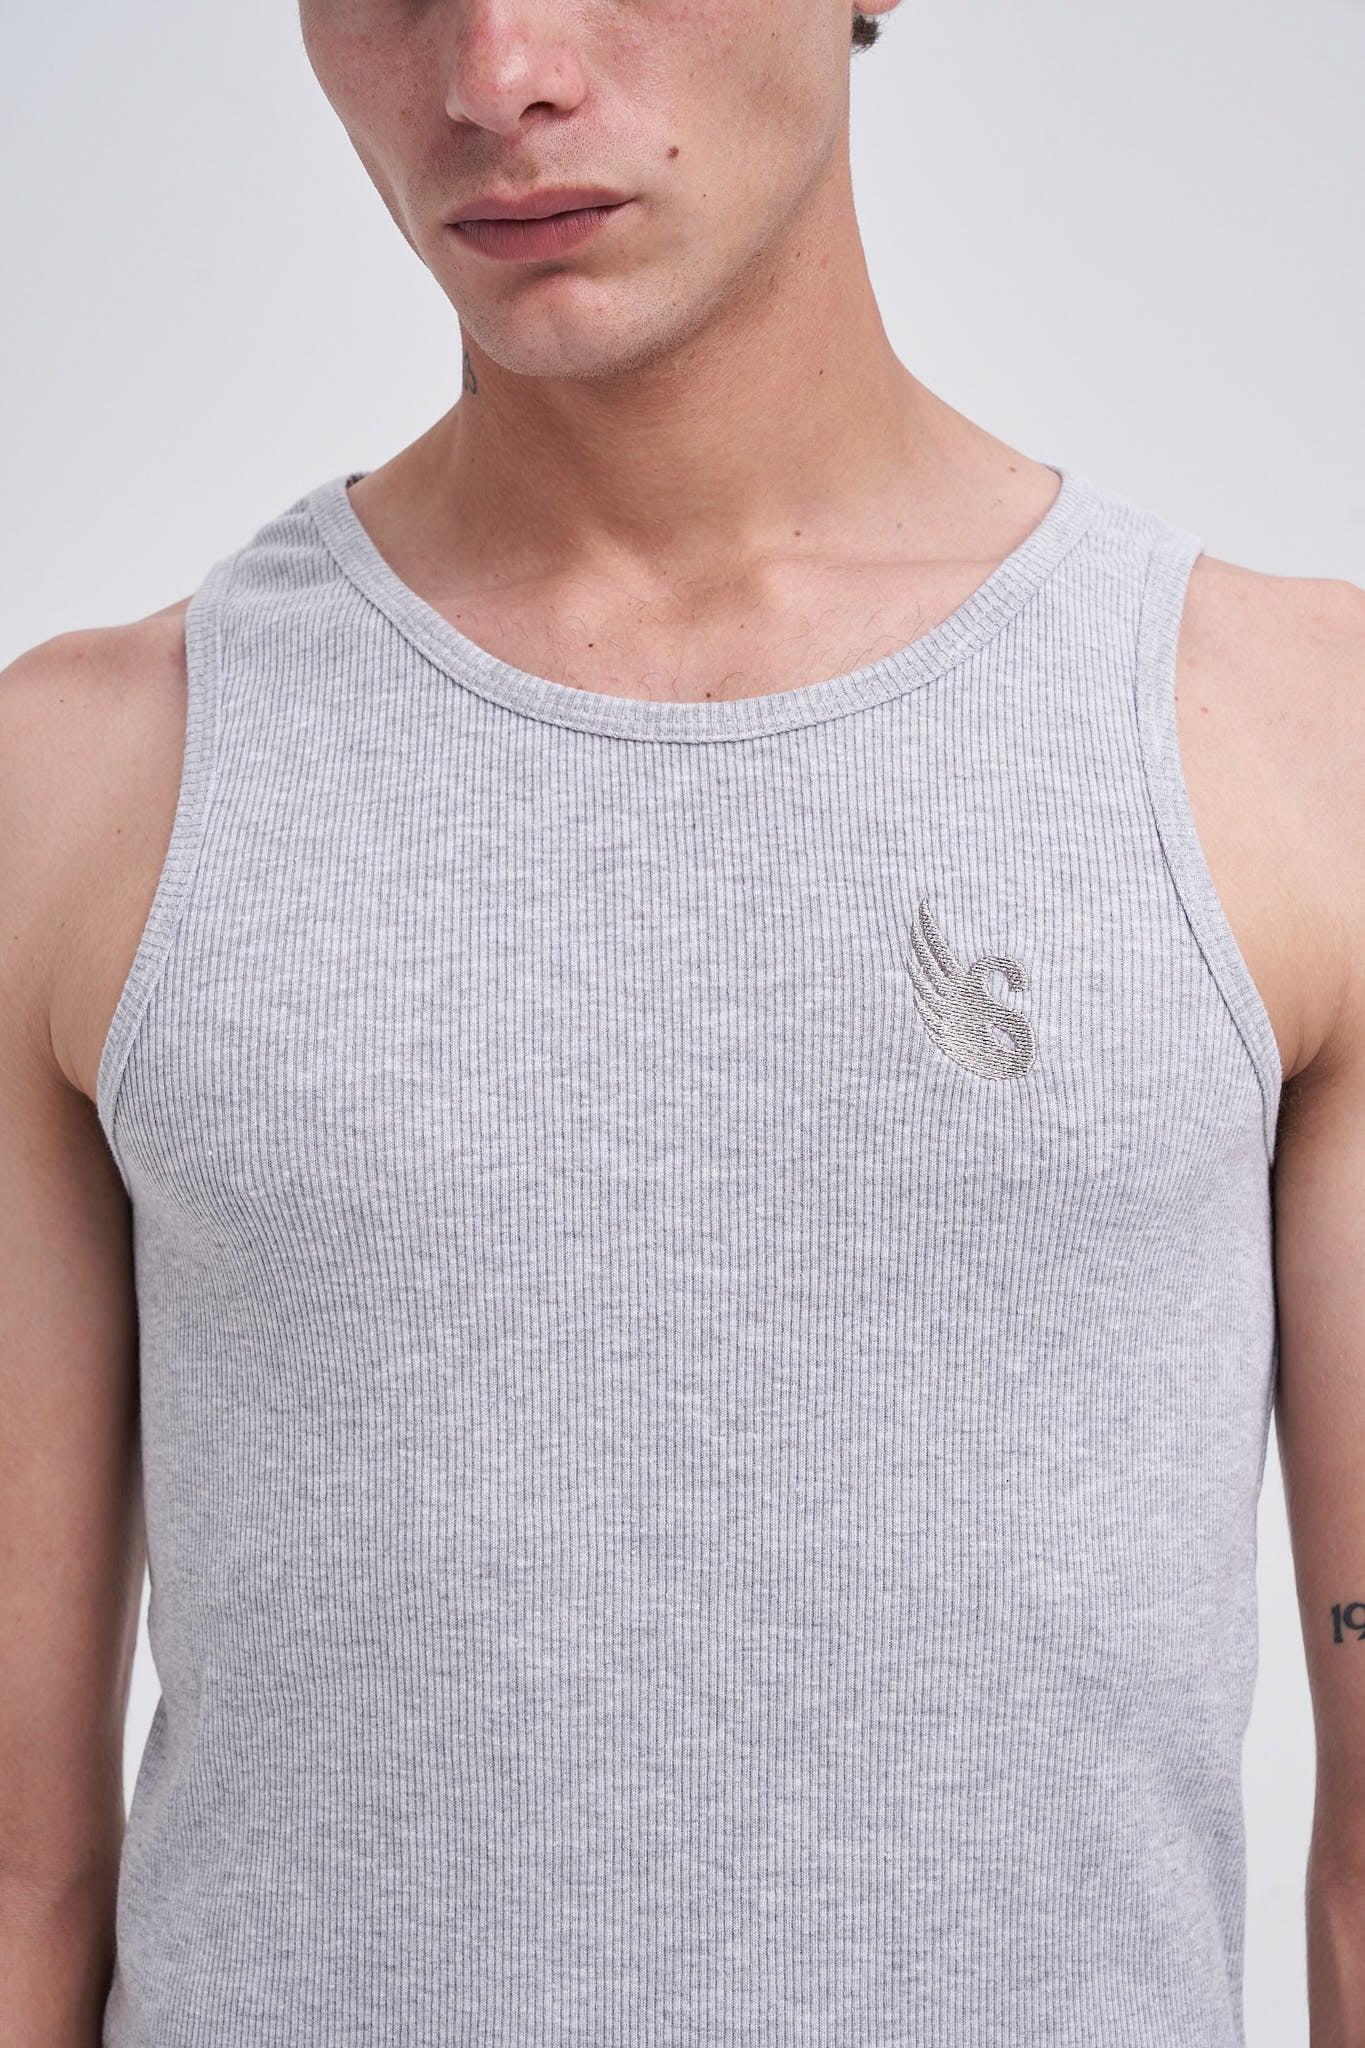 MUSCULOSA GRIS